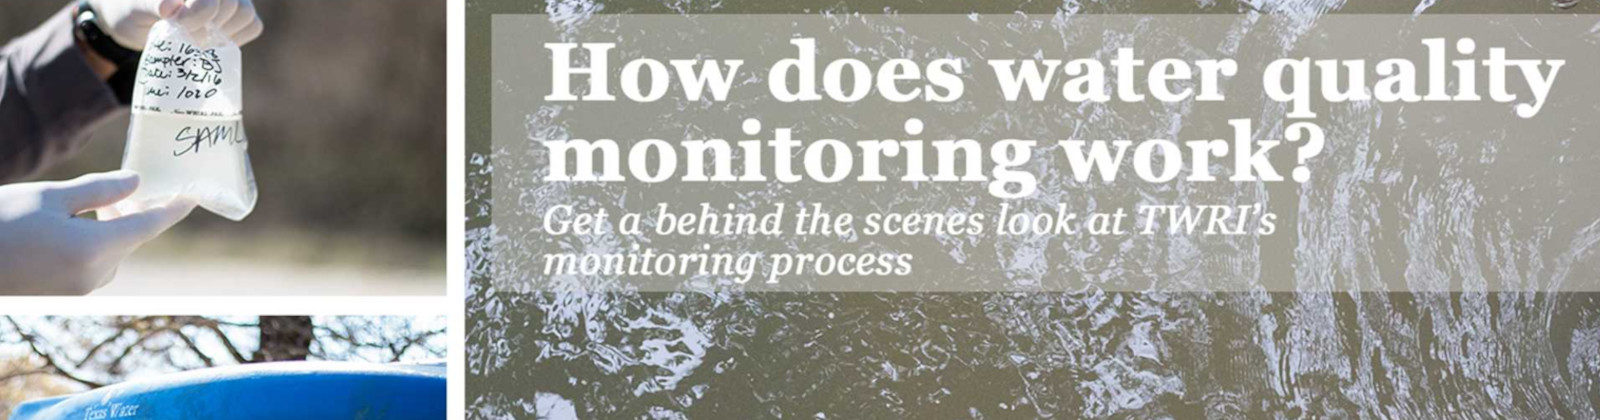 How Does Water Quality Monitoring Work